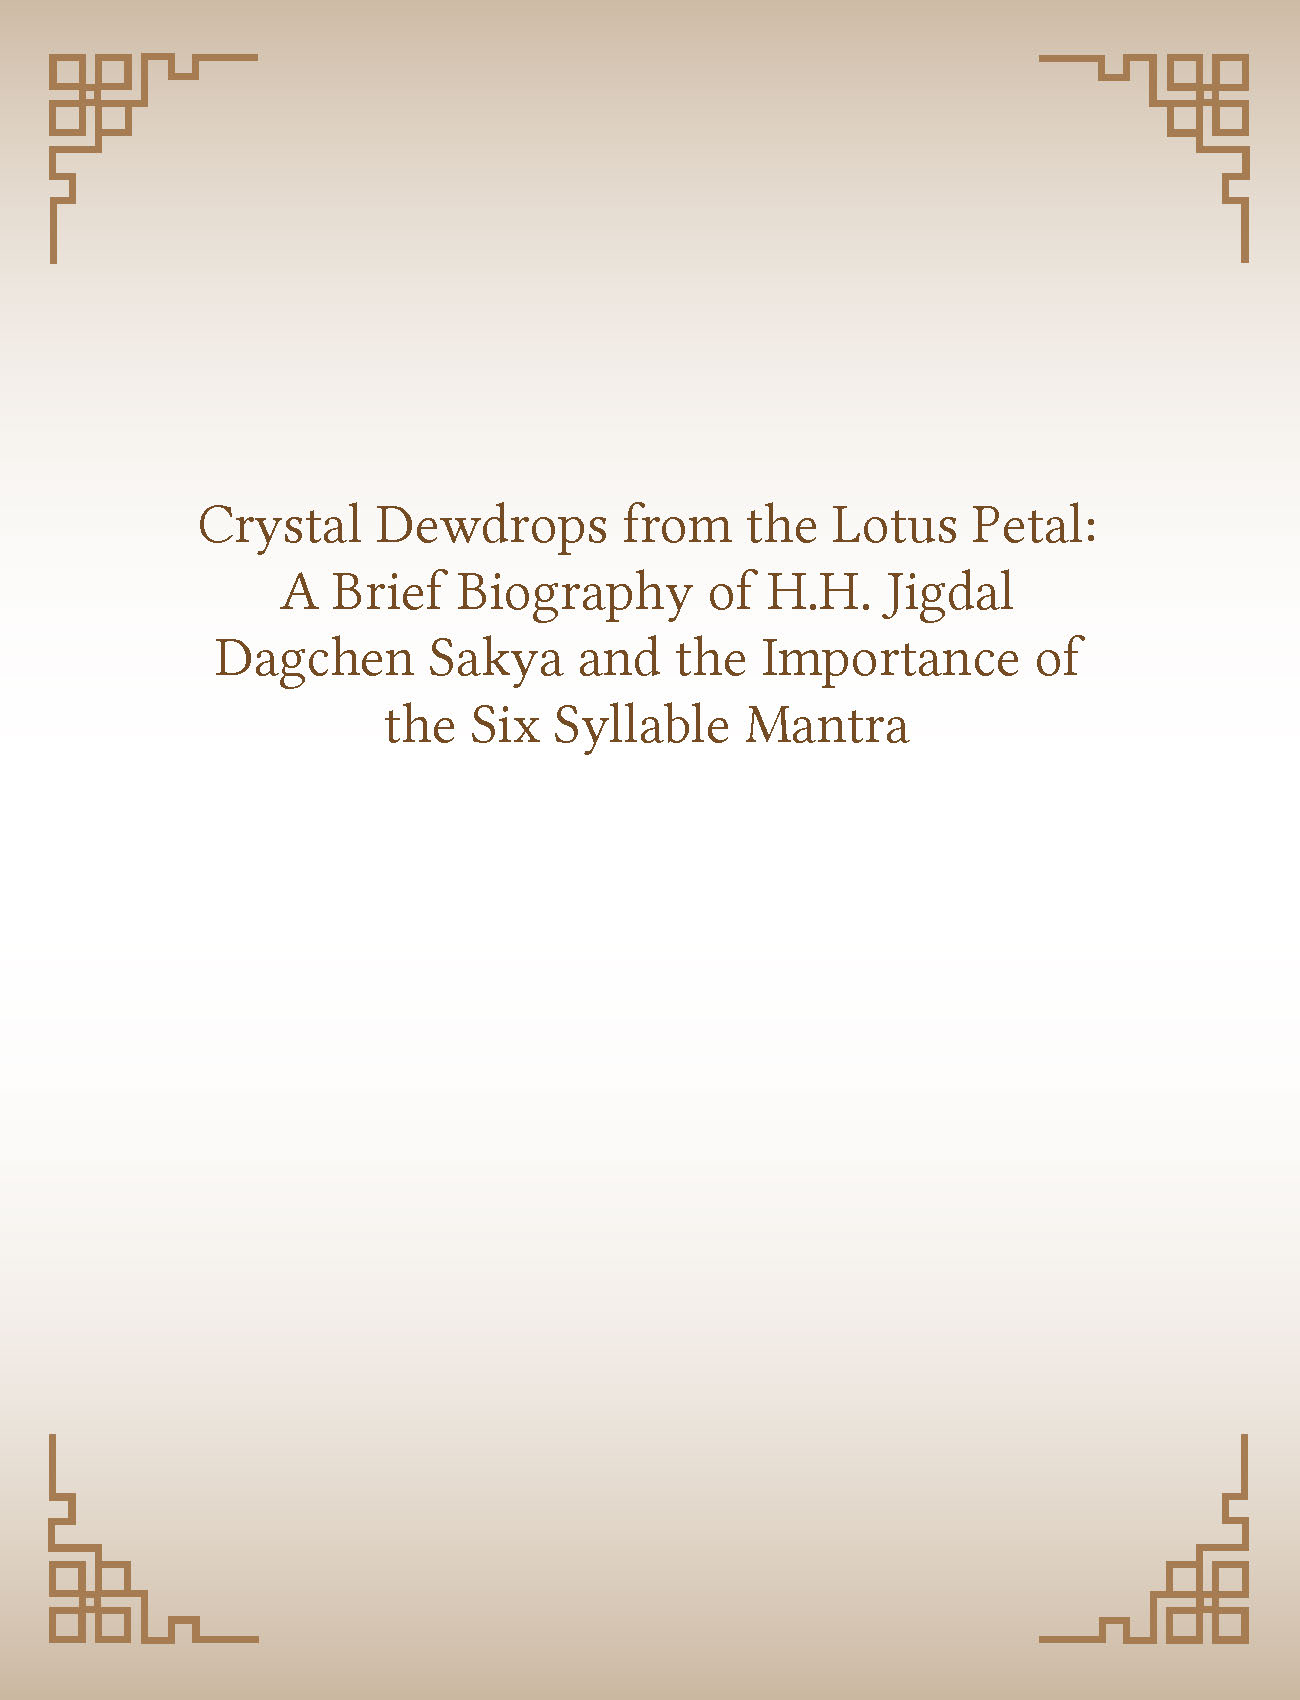 Crystal Dewdrops from the Lotus Petal: a Brief Biography of H.H. Jigdal Dagchen Sakya and the Importance of the Six Syllable Mantra